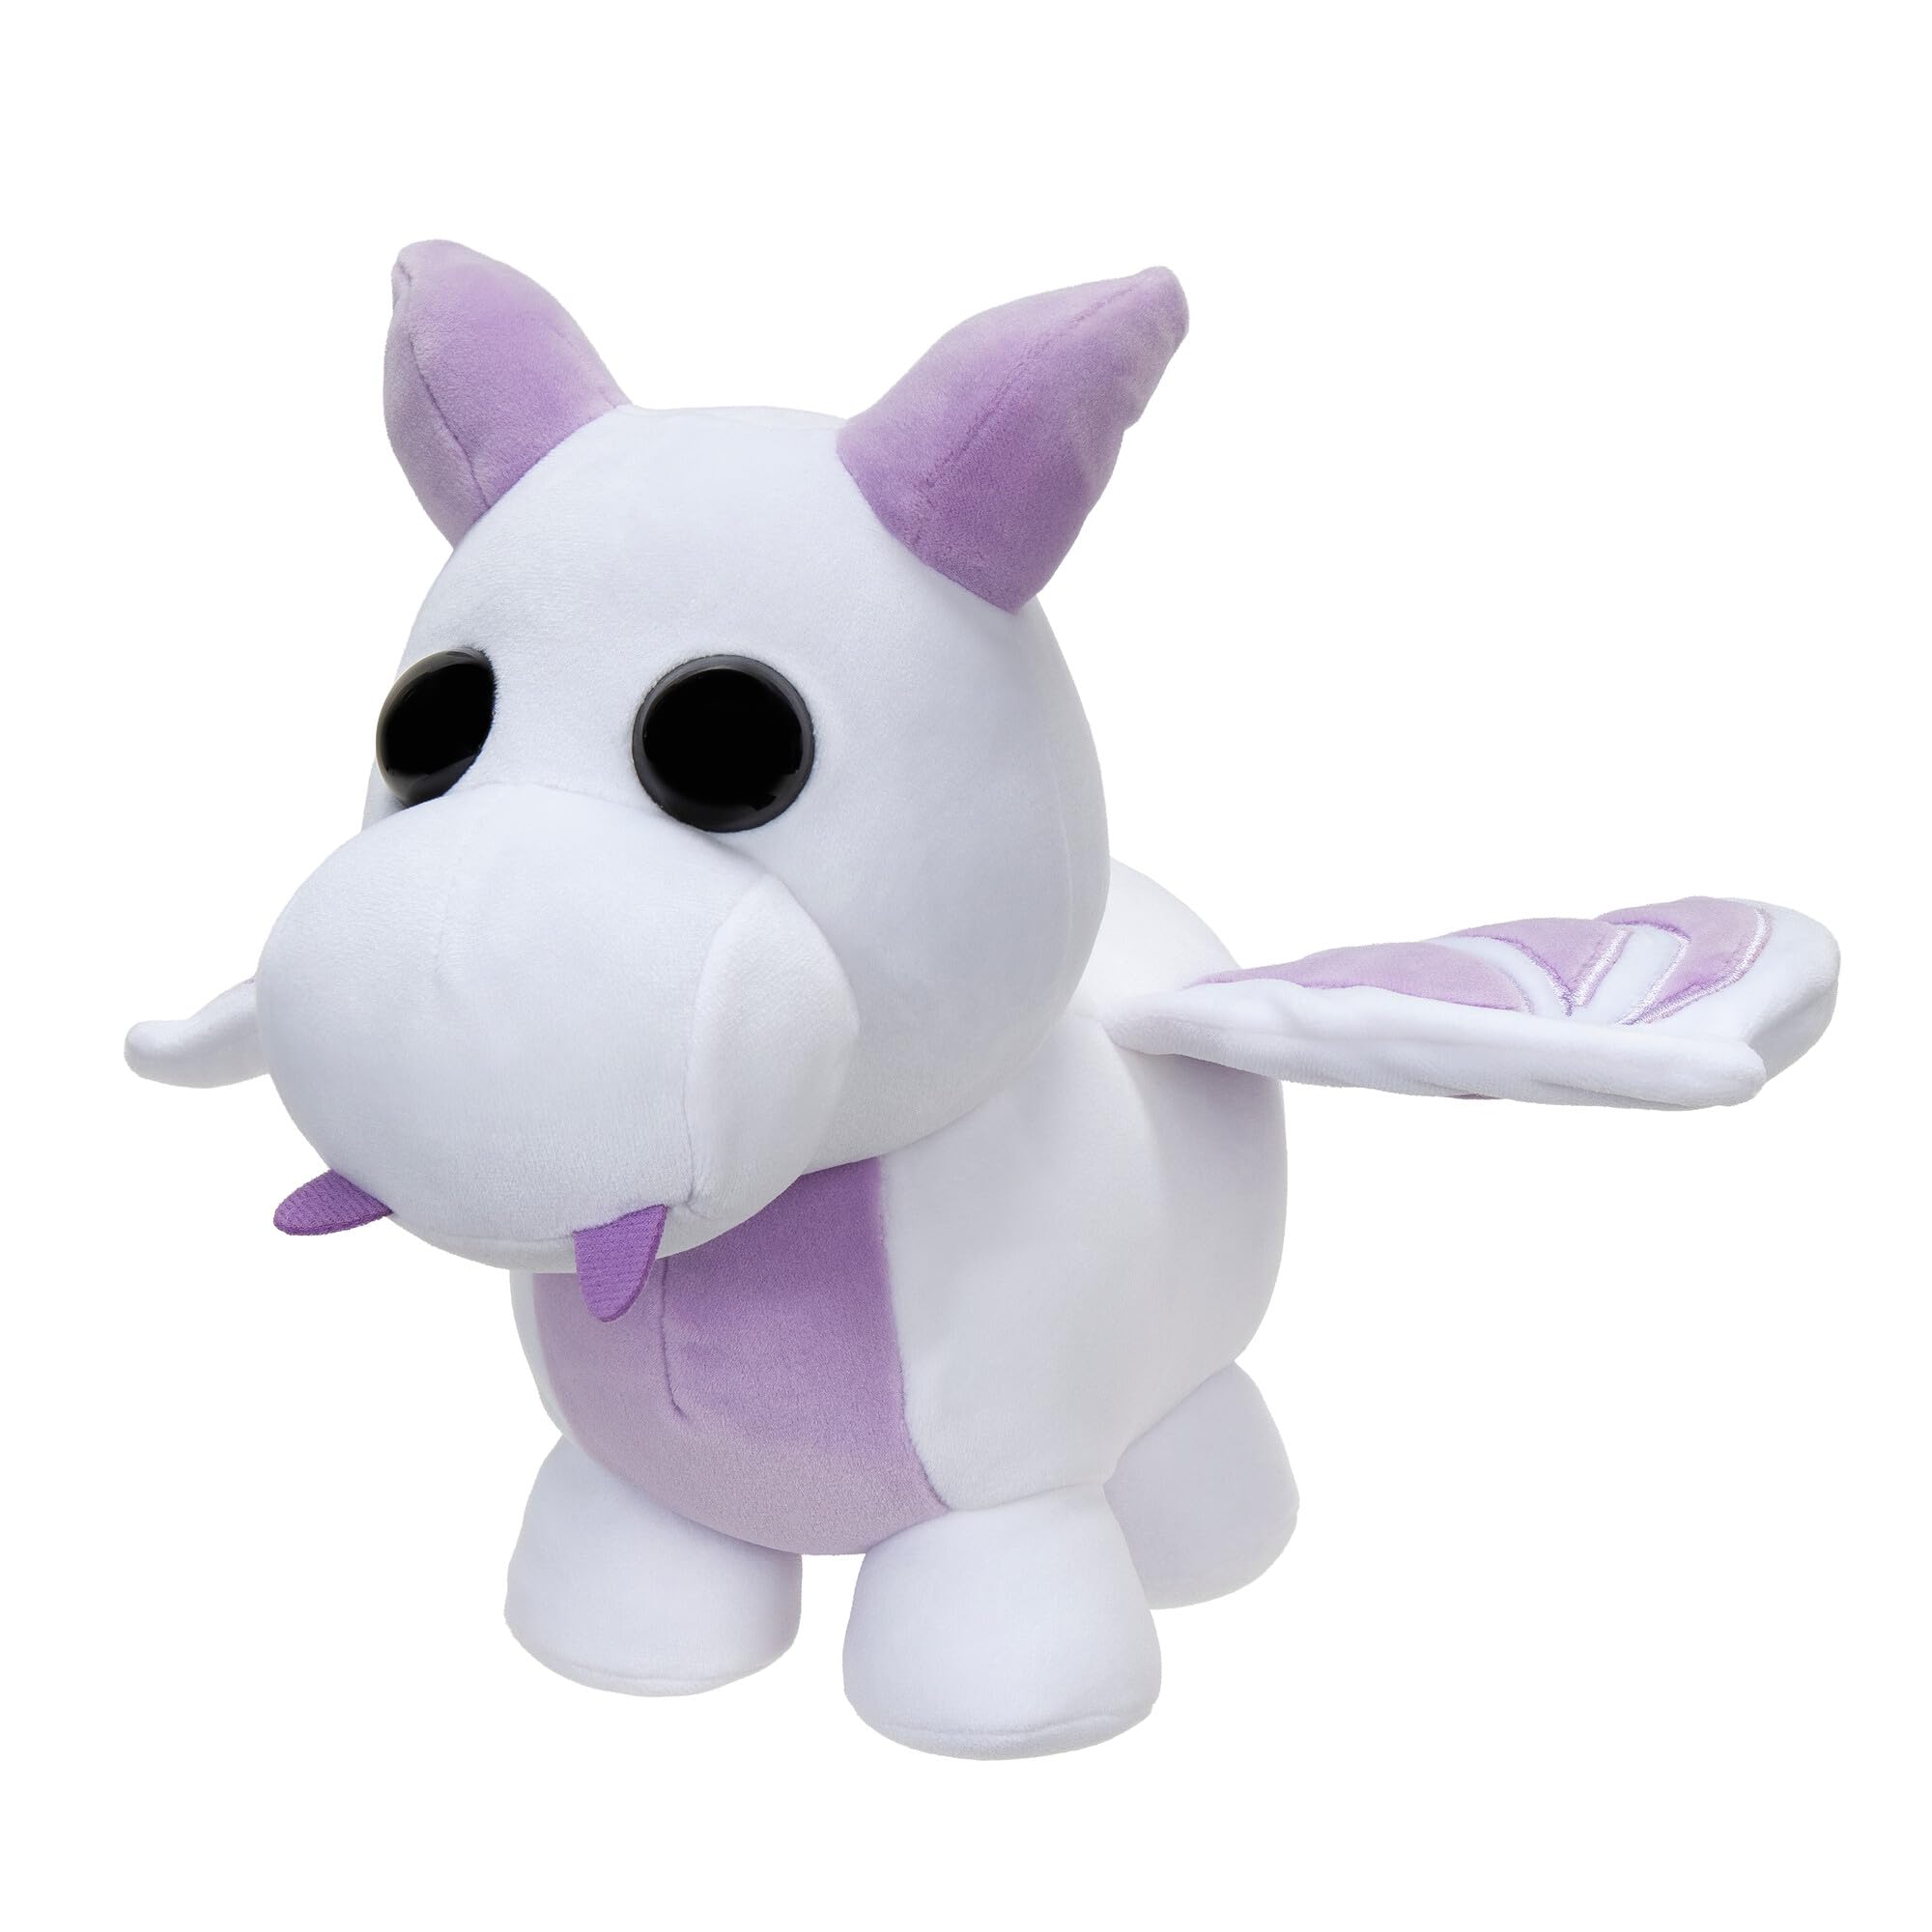 Adopt Me! Collector Plush - Lavender Dragon - Series 3 - Legendary in-Game Stylization Plush - Toys for Kids Featuring Your Favorite Pet, Ages 6+